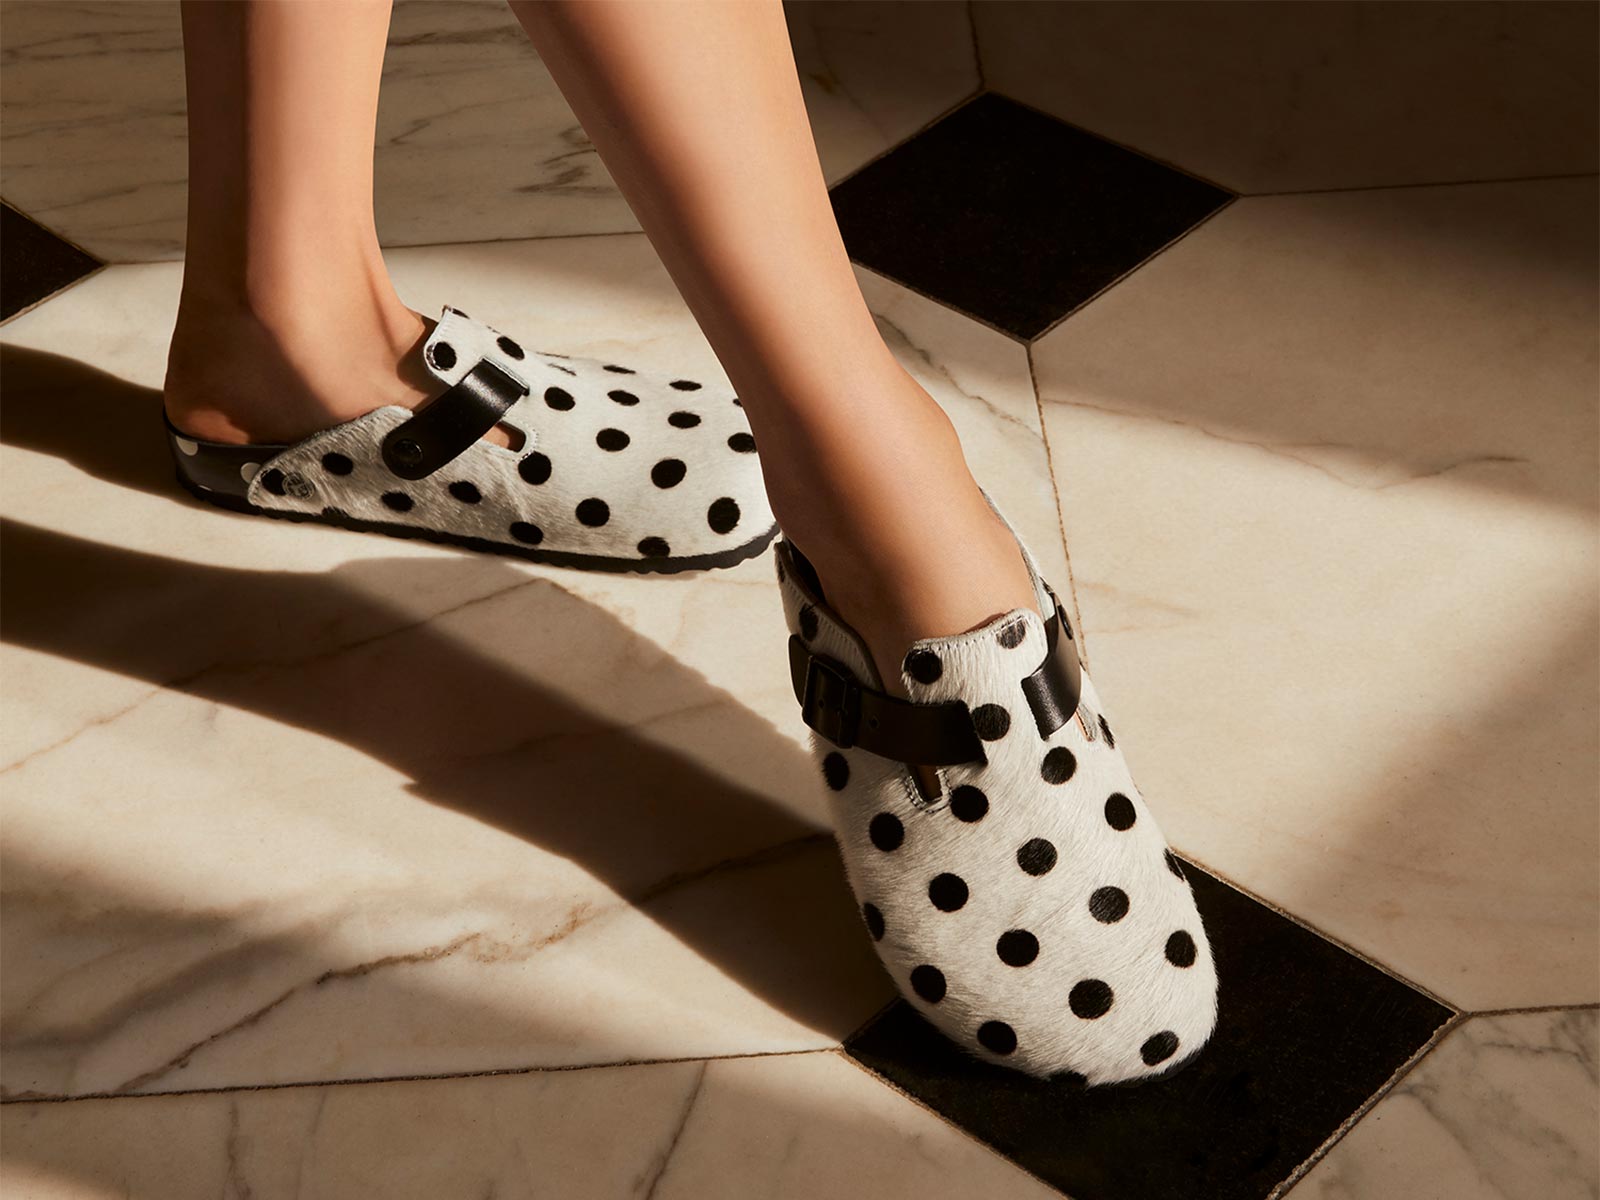 Birkenstock and Manolo Blahnik launch new models of their desired collaboration